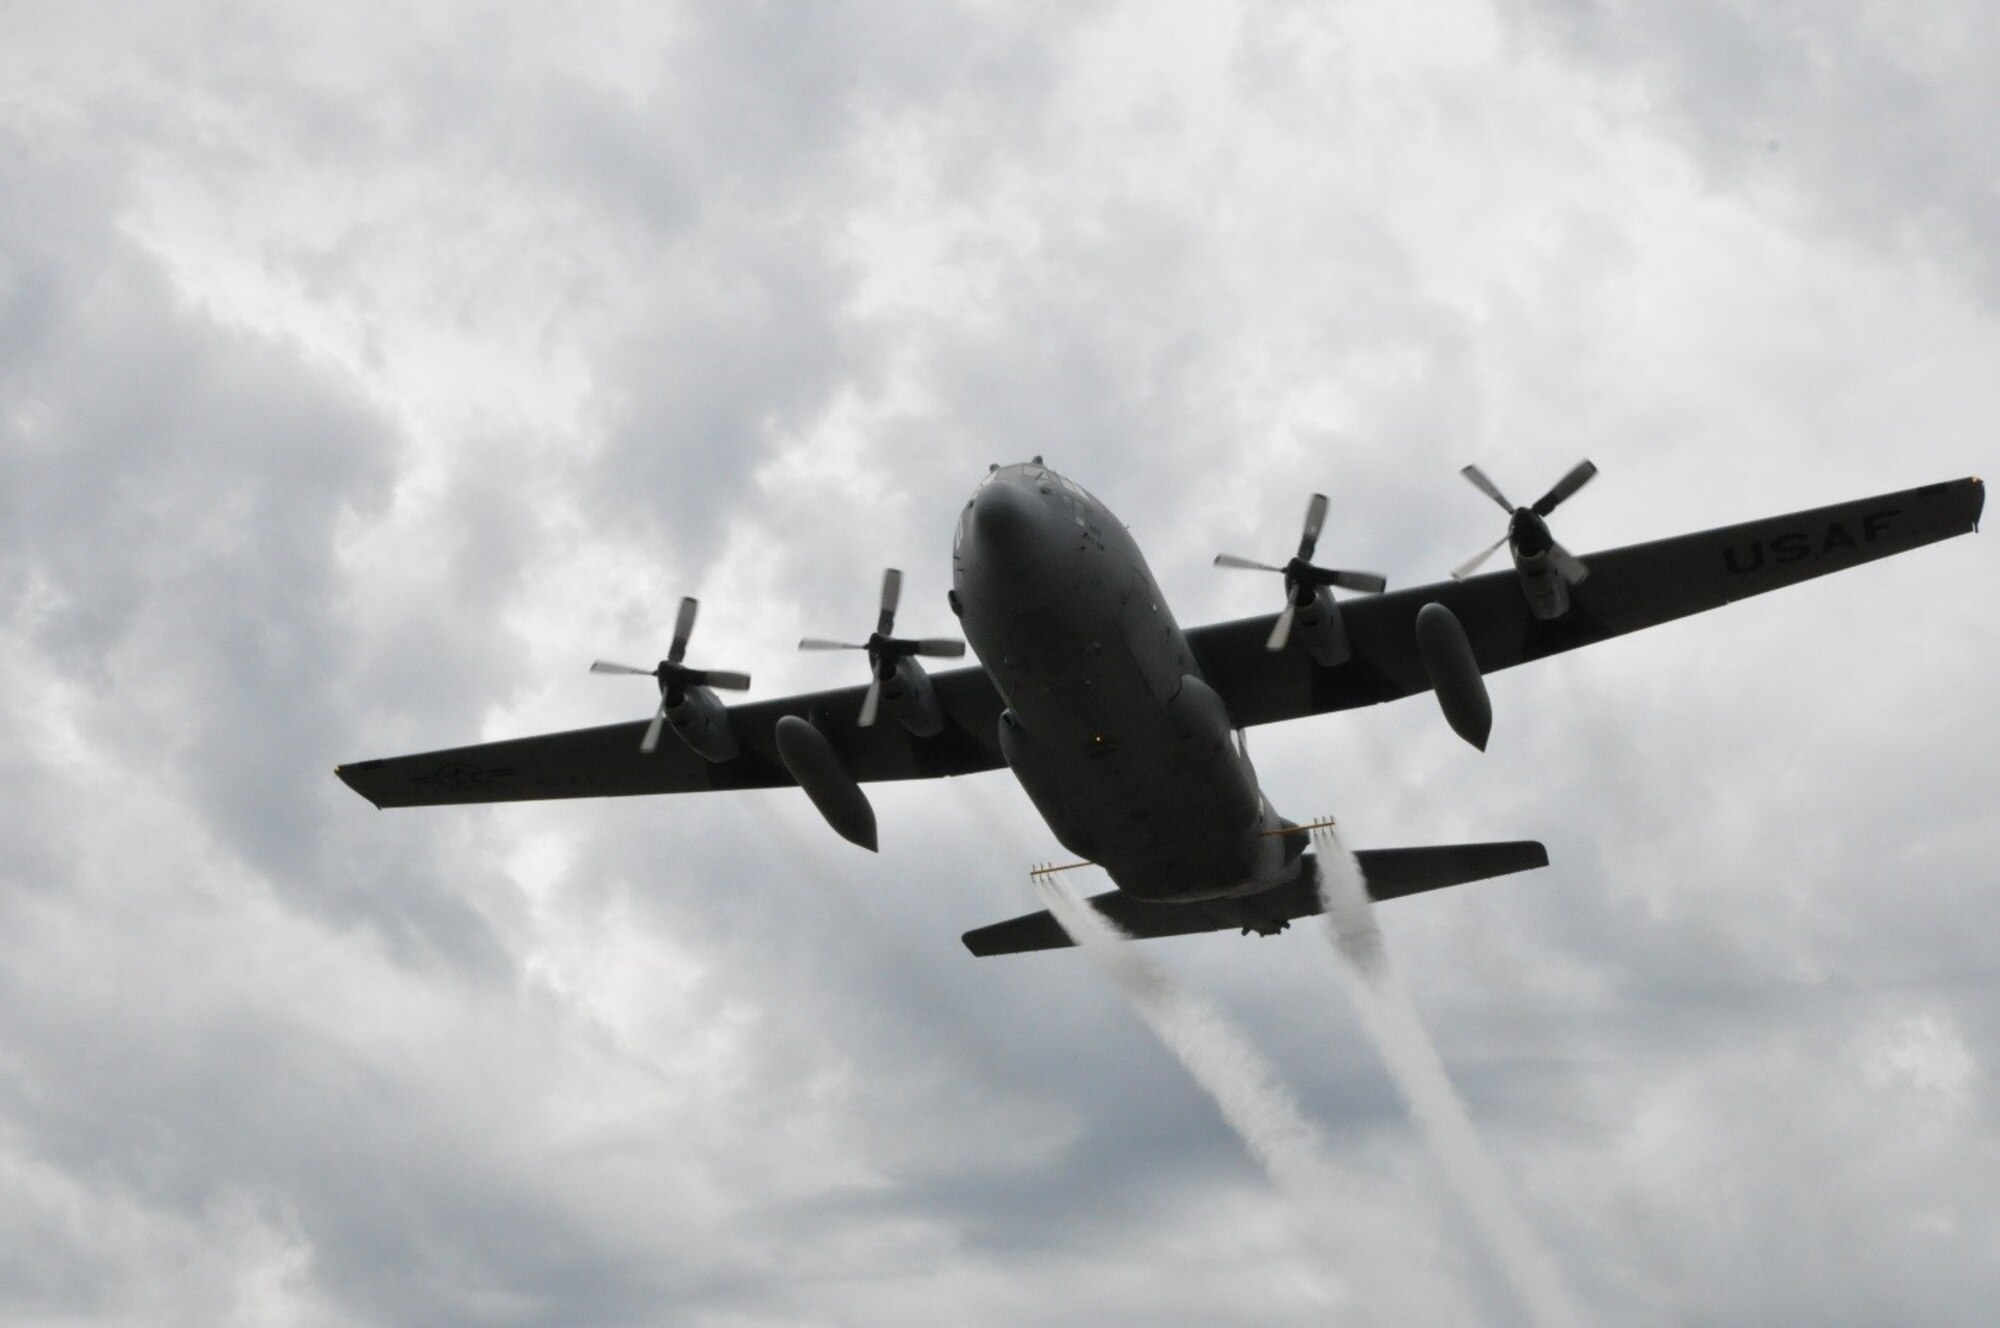 A modified U.S. C-130 aircraft, assigned to the 910th Airlift Wing, sprays water simulating a pesticide solution during a field exercise as part of the Department of Defense Aerial Spray Certification Course, Jan. 13, 2016. The 910th Airlift Wing has been tasked with providing its unique aerial spray capability to assist with recovery efforts in eastern Texas, following the devastation of Hurricane Harvey. Youngstown Air Reserve Station's 910th Airlift Wing is home to DoD’s only aerial spray mission. (U.S. Air Force photo/Master Sgt. Bob Barko Jr.)